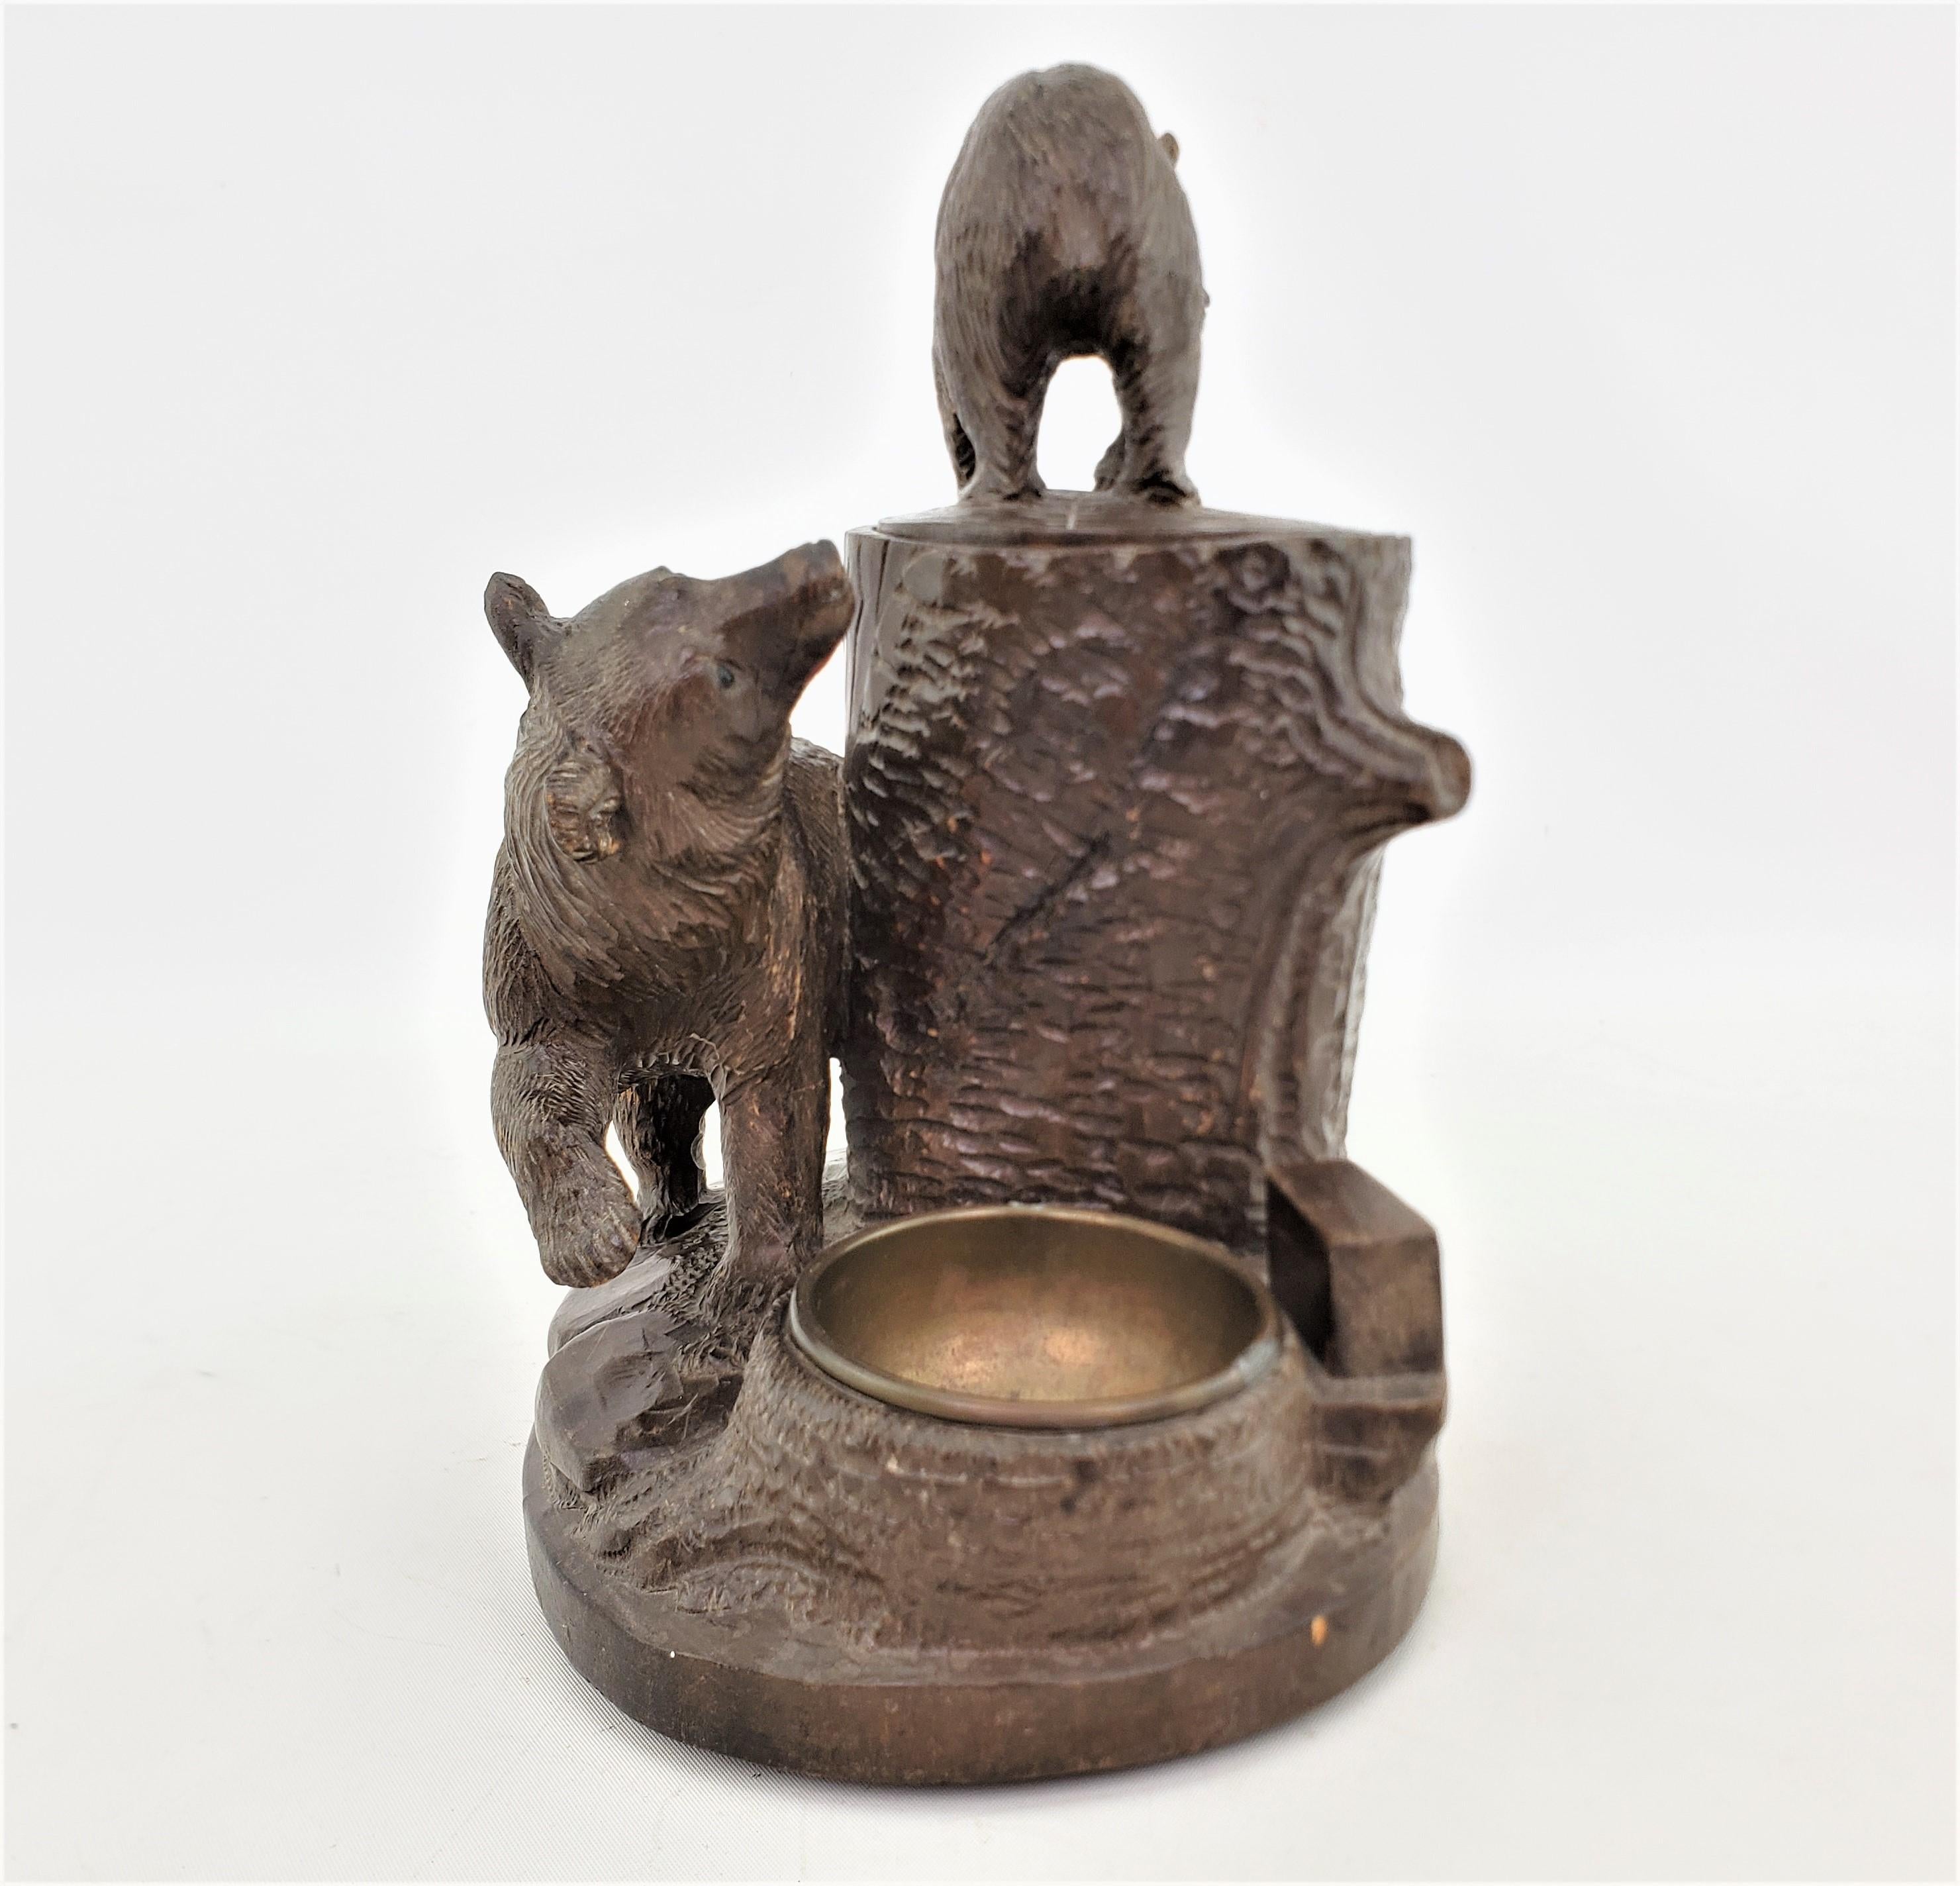 20th Century Antique Hand-Carved Black Forest Tobacco Jar or Humidor & Ashtray with Bears For Sale